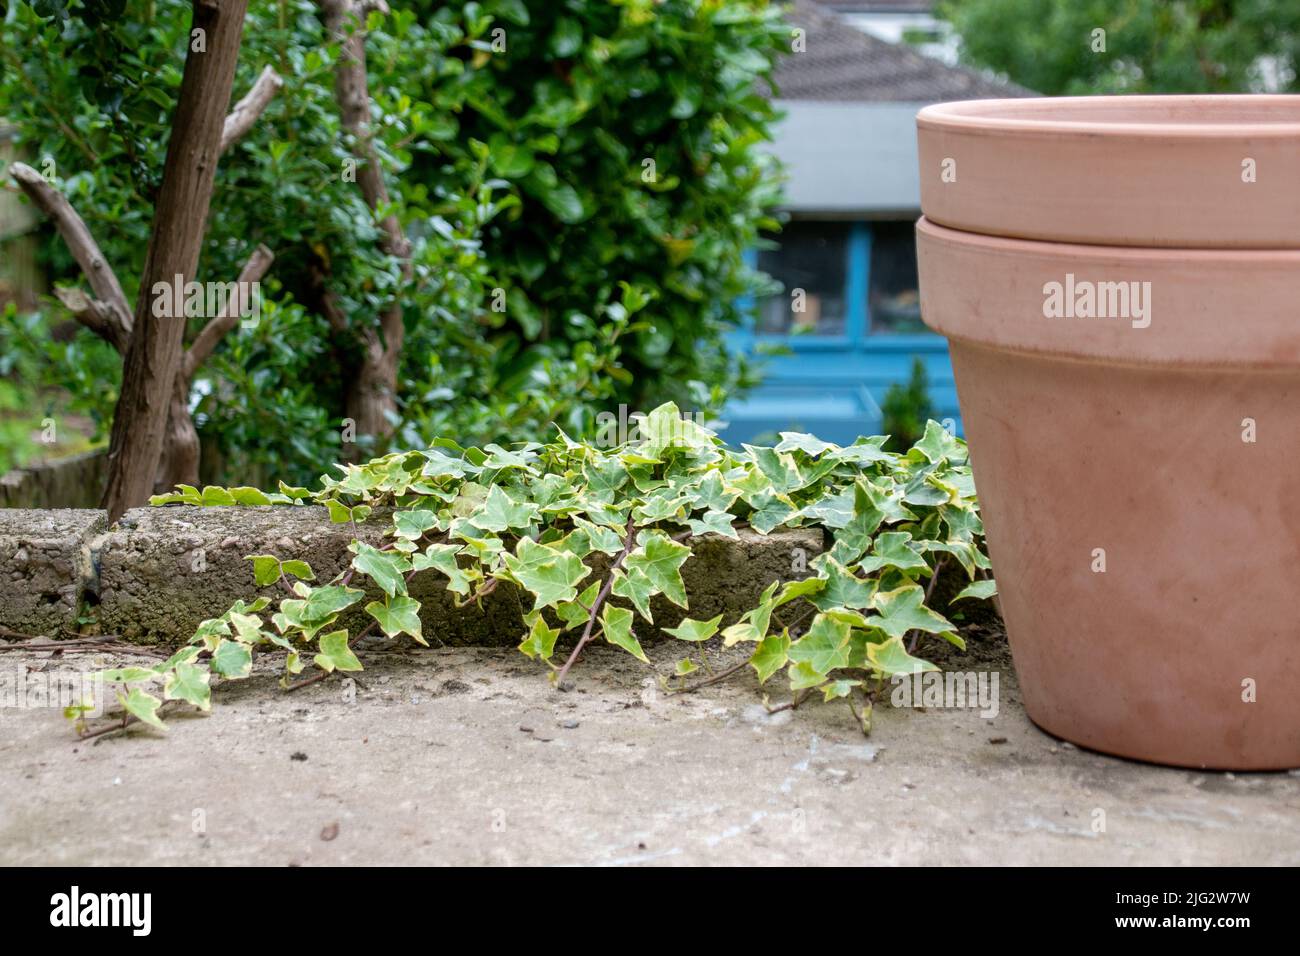 Ivy creeping spreading on concrete patio in suburban garden with empty clay terracotta flower pots stacked Stock Photo